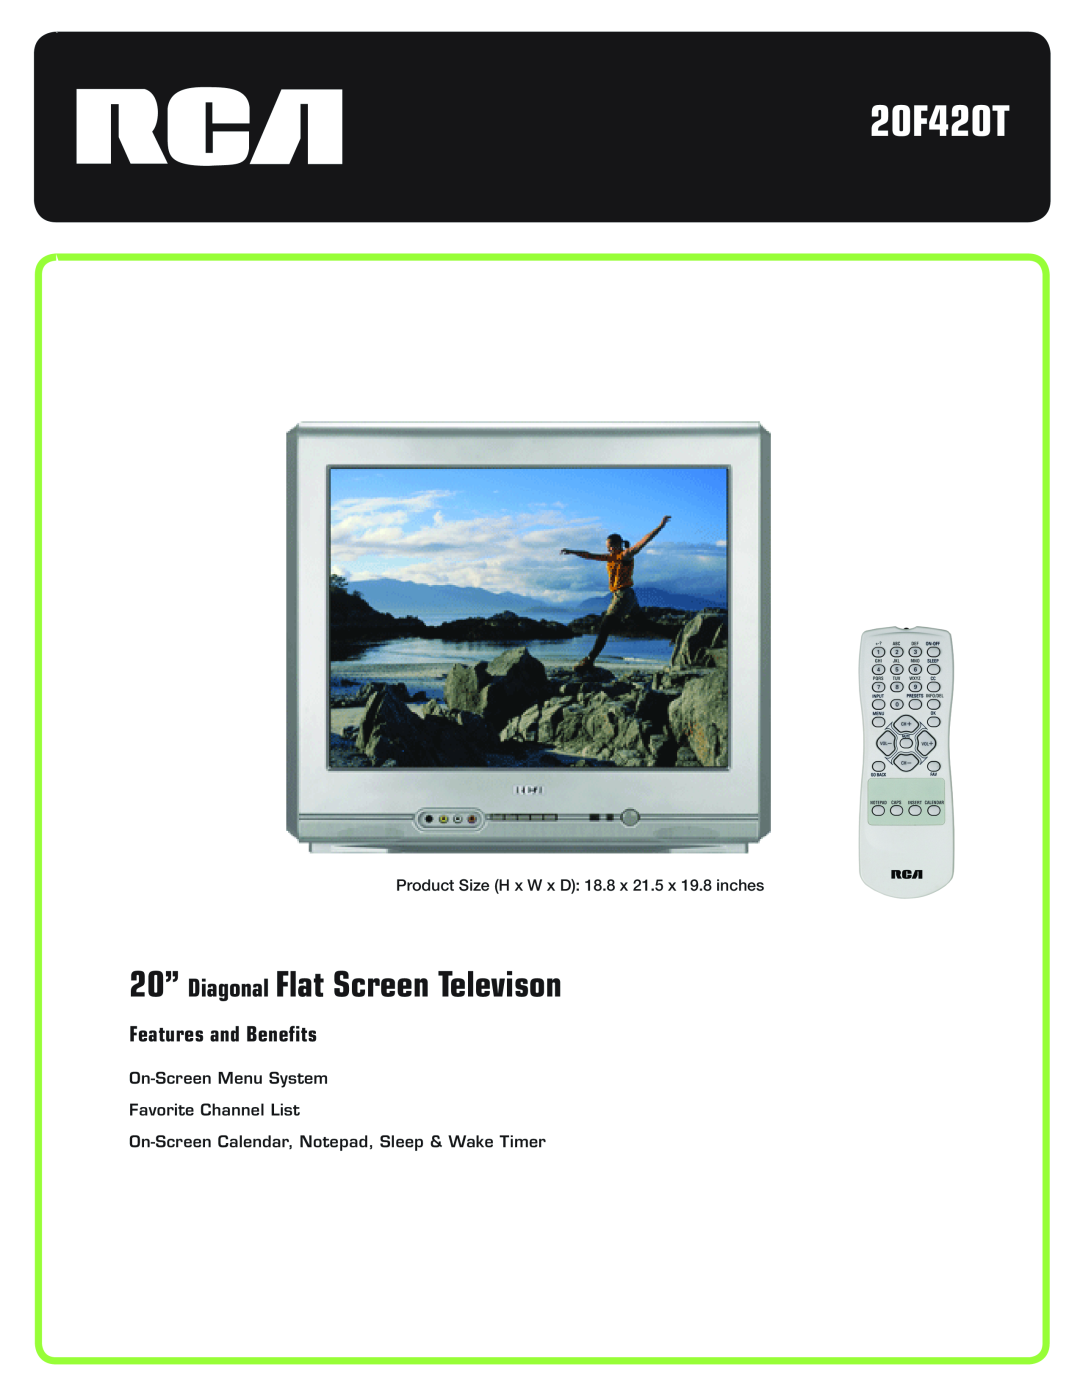 RCA 20F420T manual 20” Diagonal Flat Screen Televison, Features and Benefits, On-Screen Menu System Favorite Channel List 